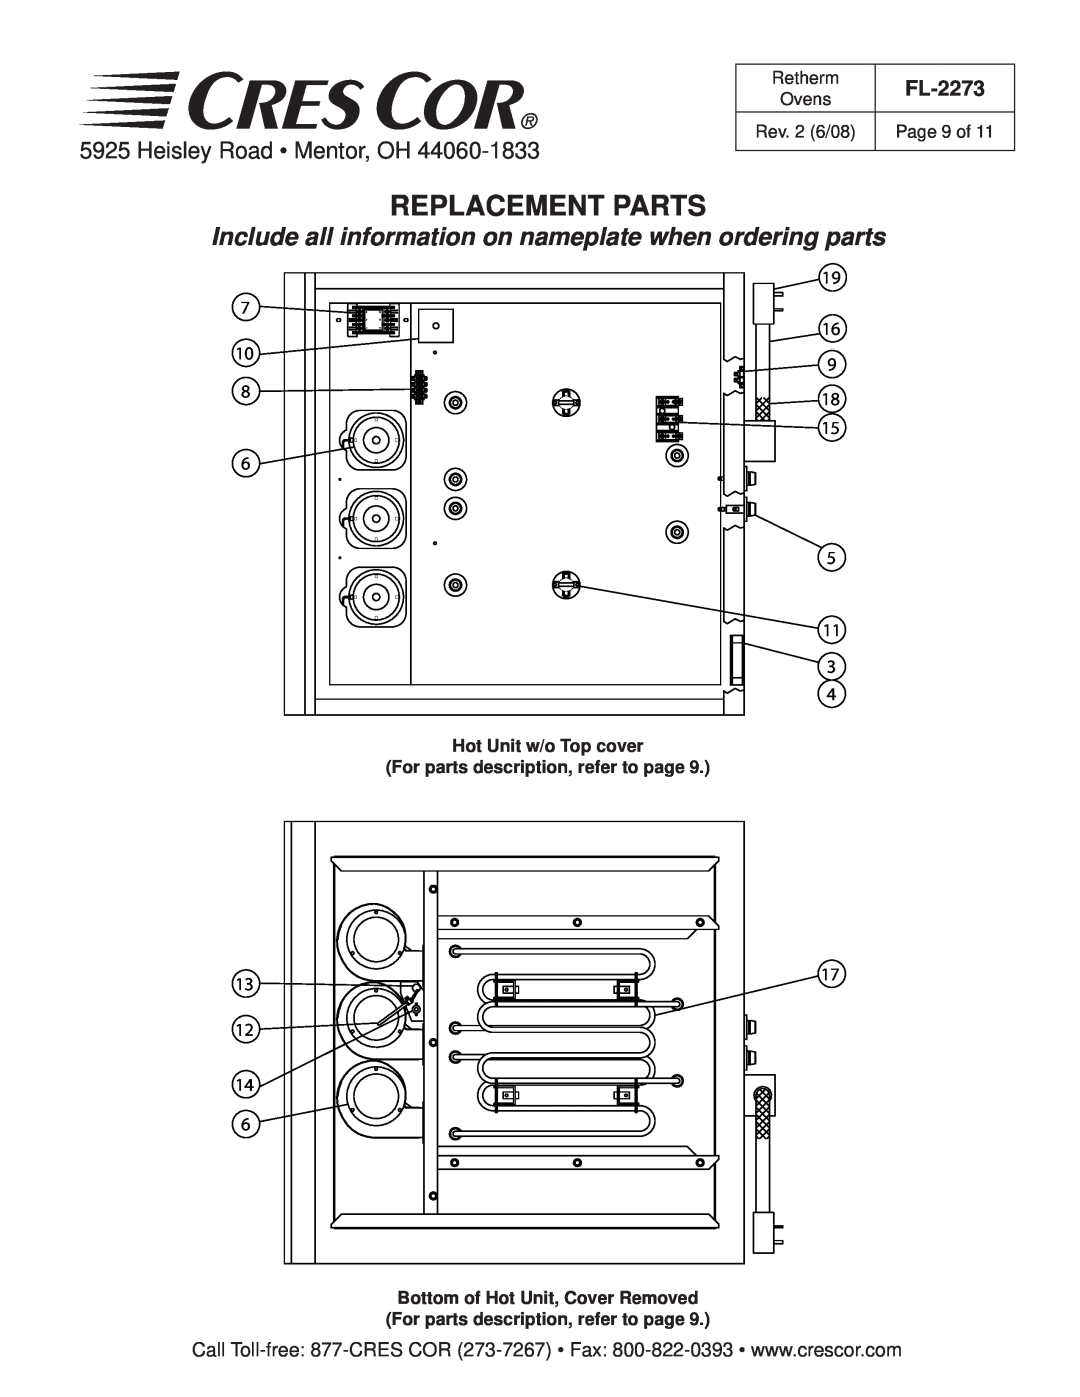 Cres Cor RR-1332 Series Retherm Ovens Replacement Parts, Include all information on nameplate when ordering parts, FL-2273 